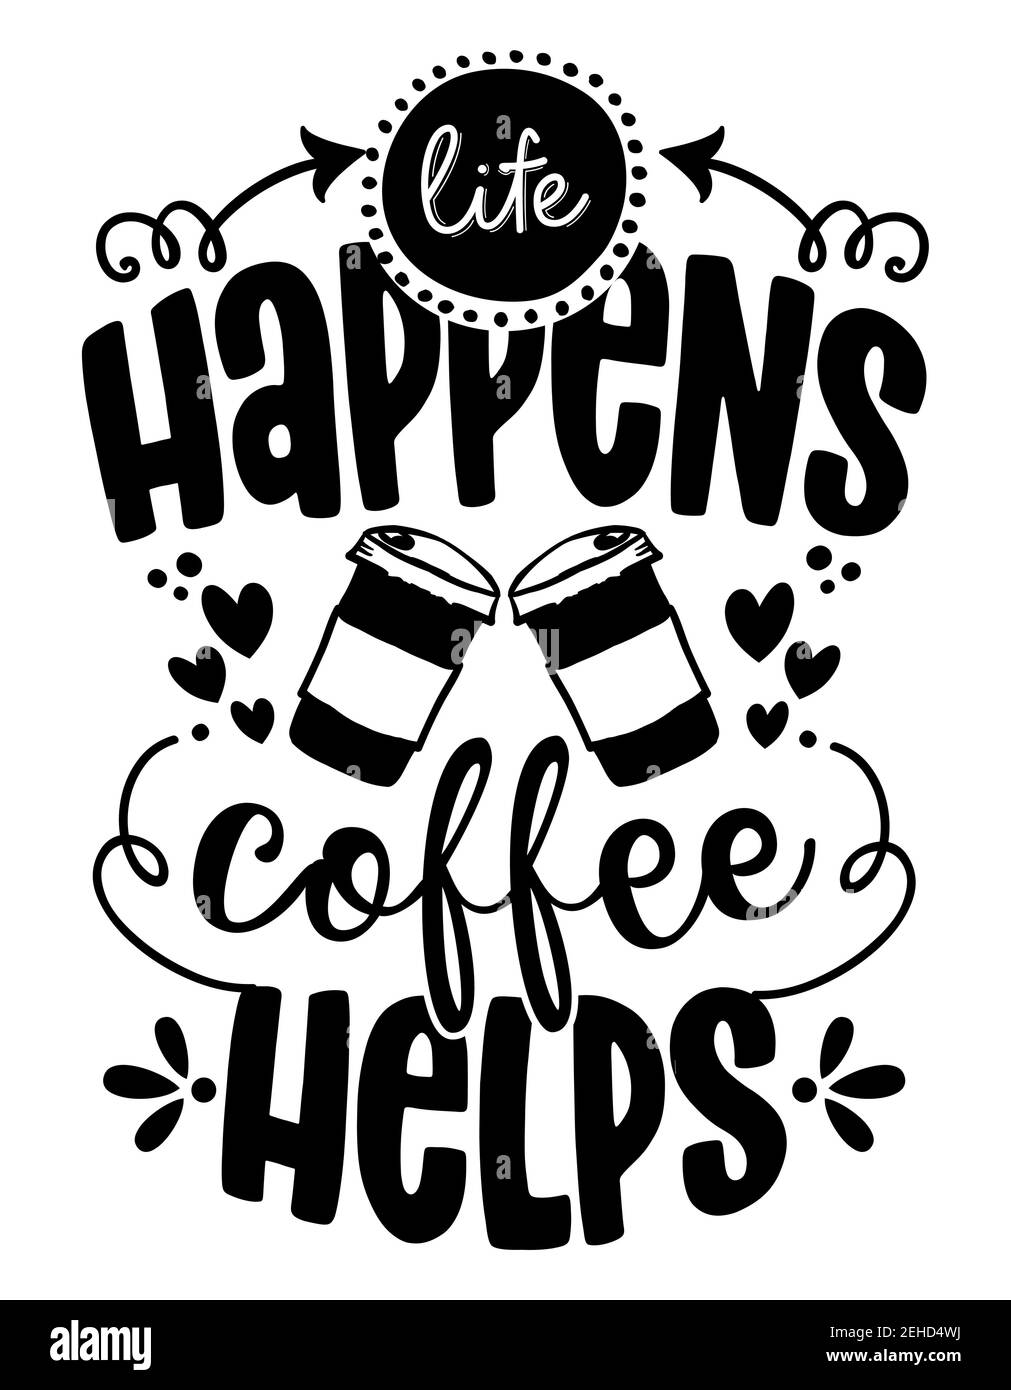 Life happens, Coffee helps - design for t-shirts, cards, restaurant or coffee shop wall decoration. Hand painted brush pen modern calligraphy isolated Stock Vector